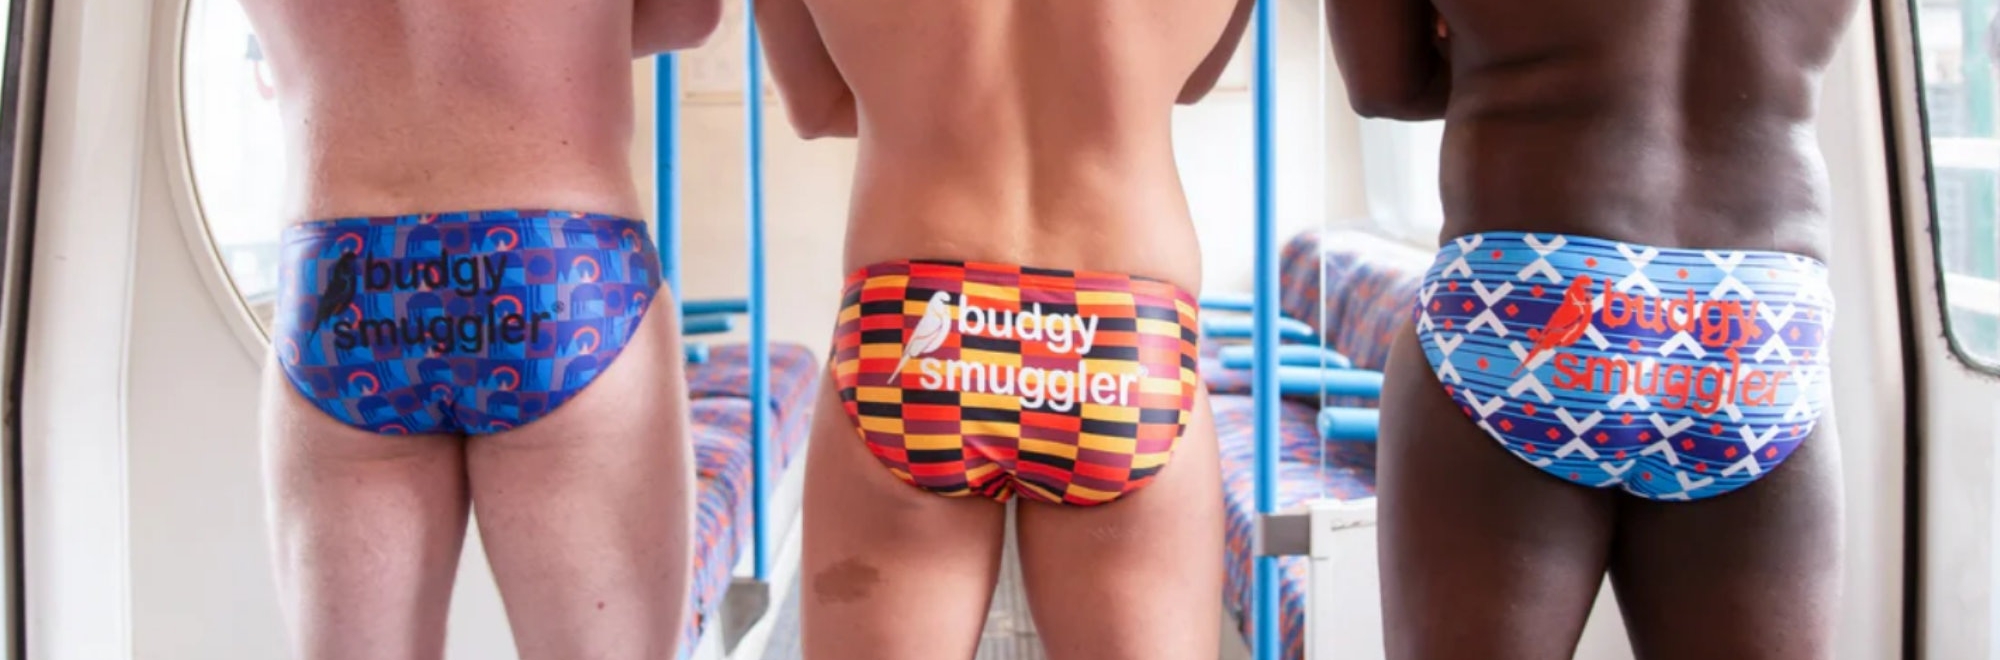 PR Stuntwatch: Scottish Gas Murrayfield get Swiftie fever, TFL slips into its Budgy Smugglers and VisitOslo has an existential crisis